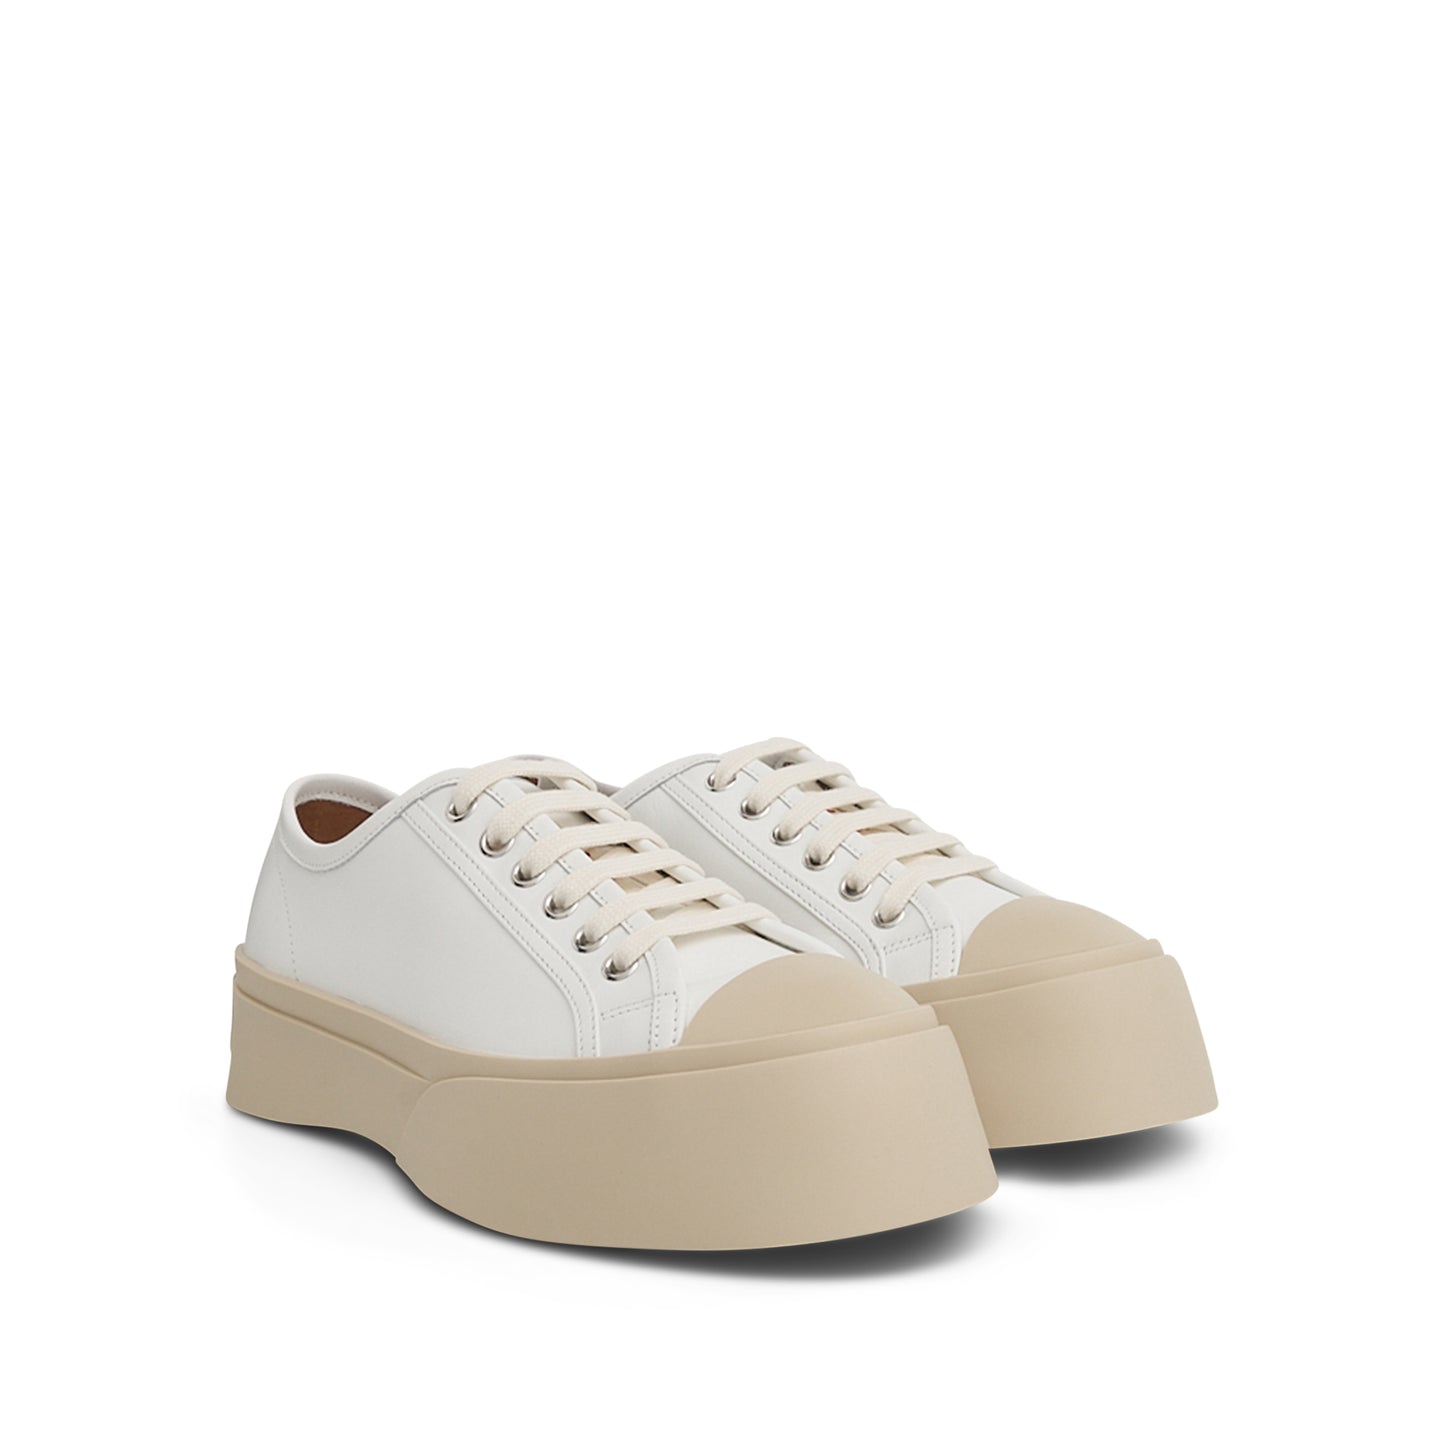 Pablo Lace Up Sneaker in Lily White